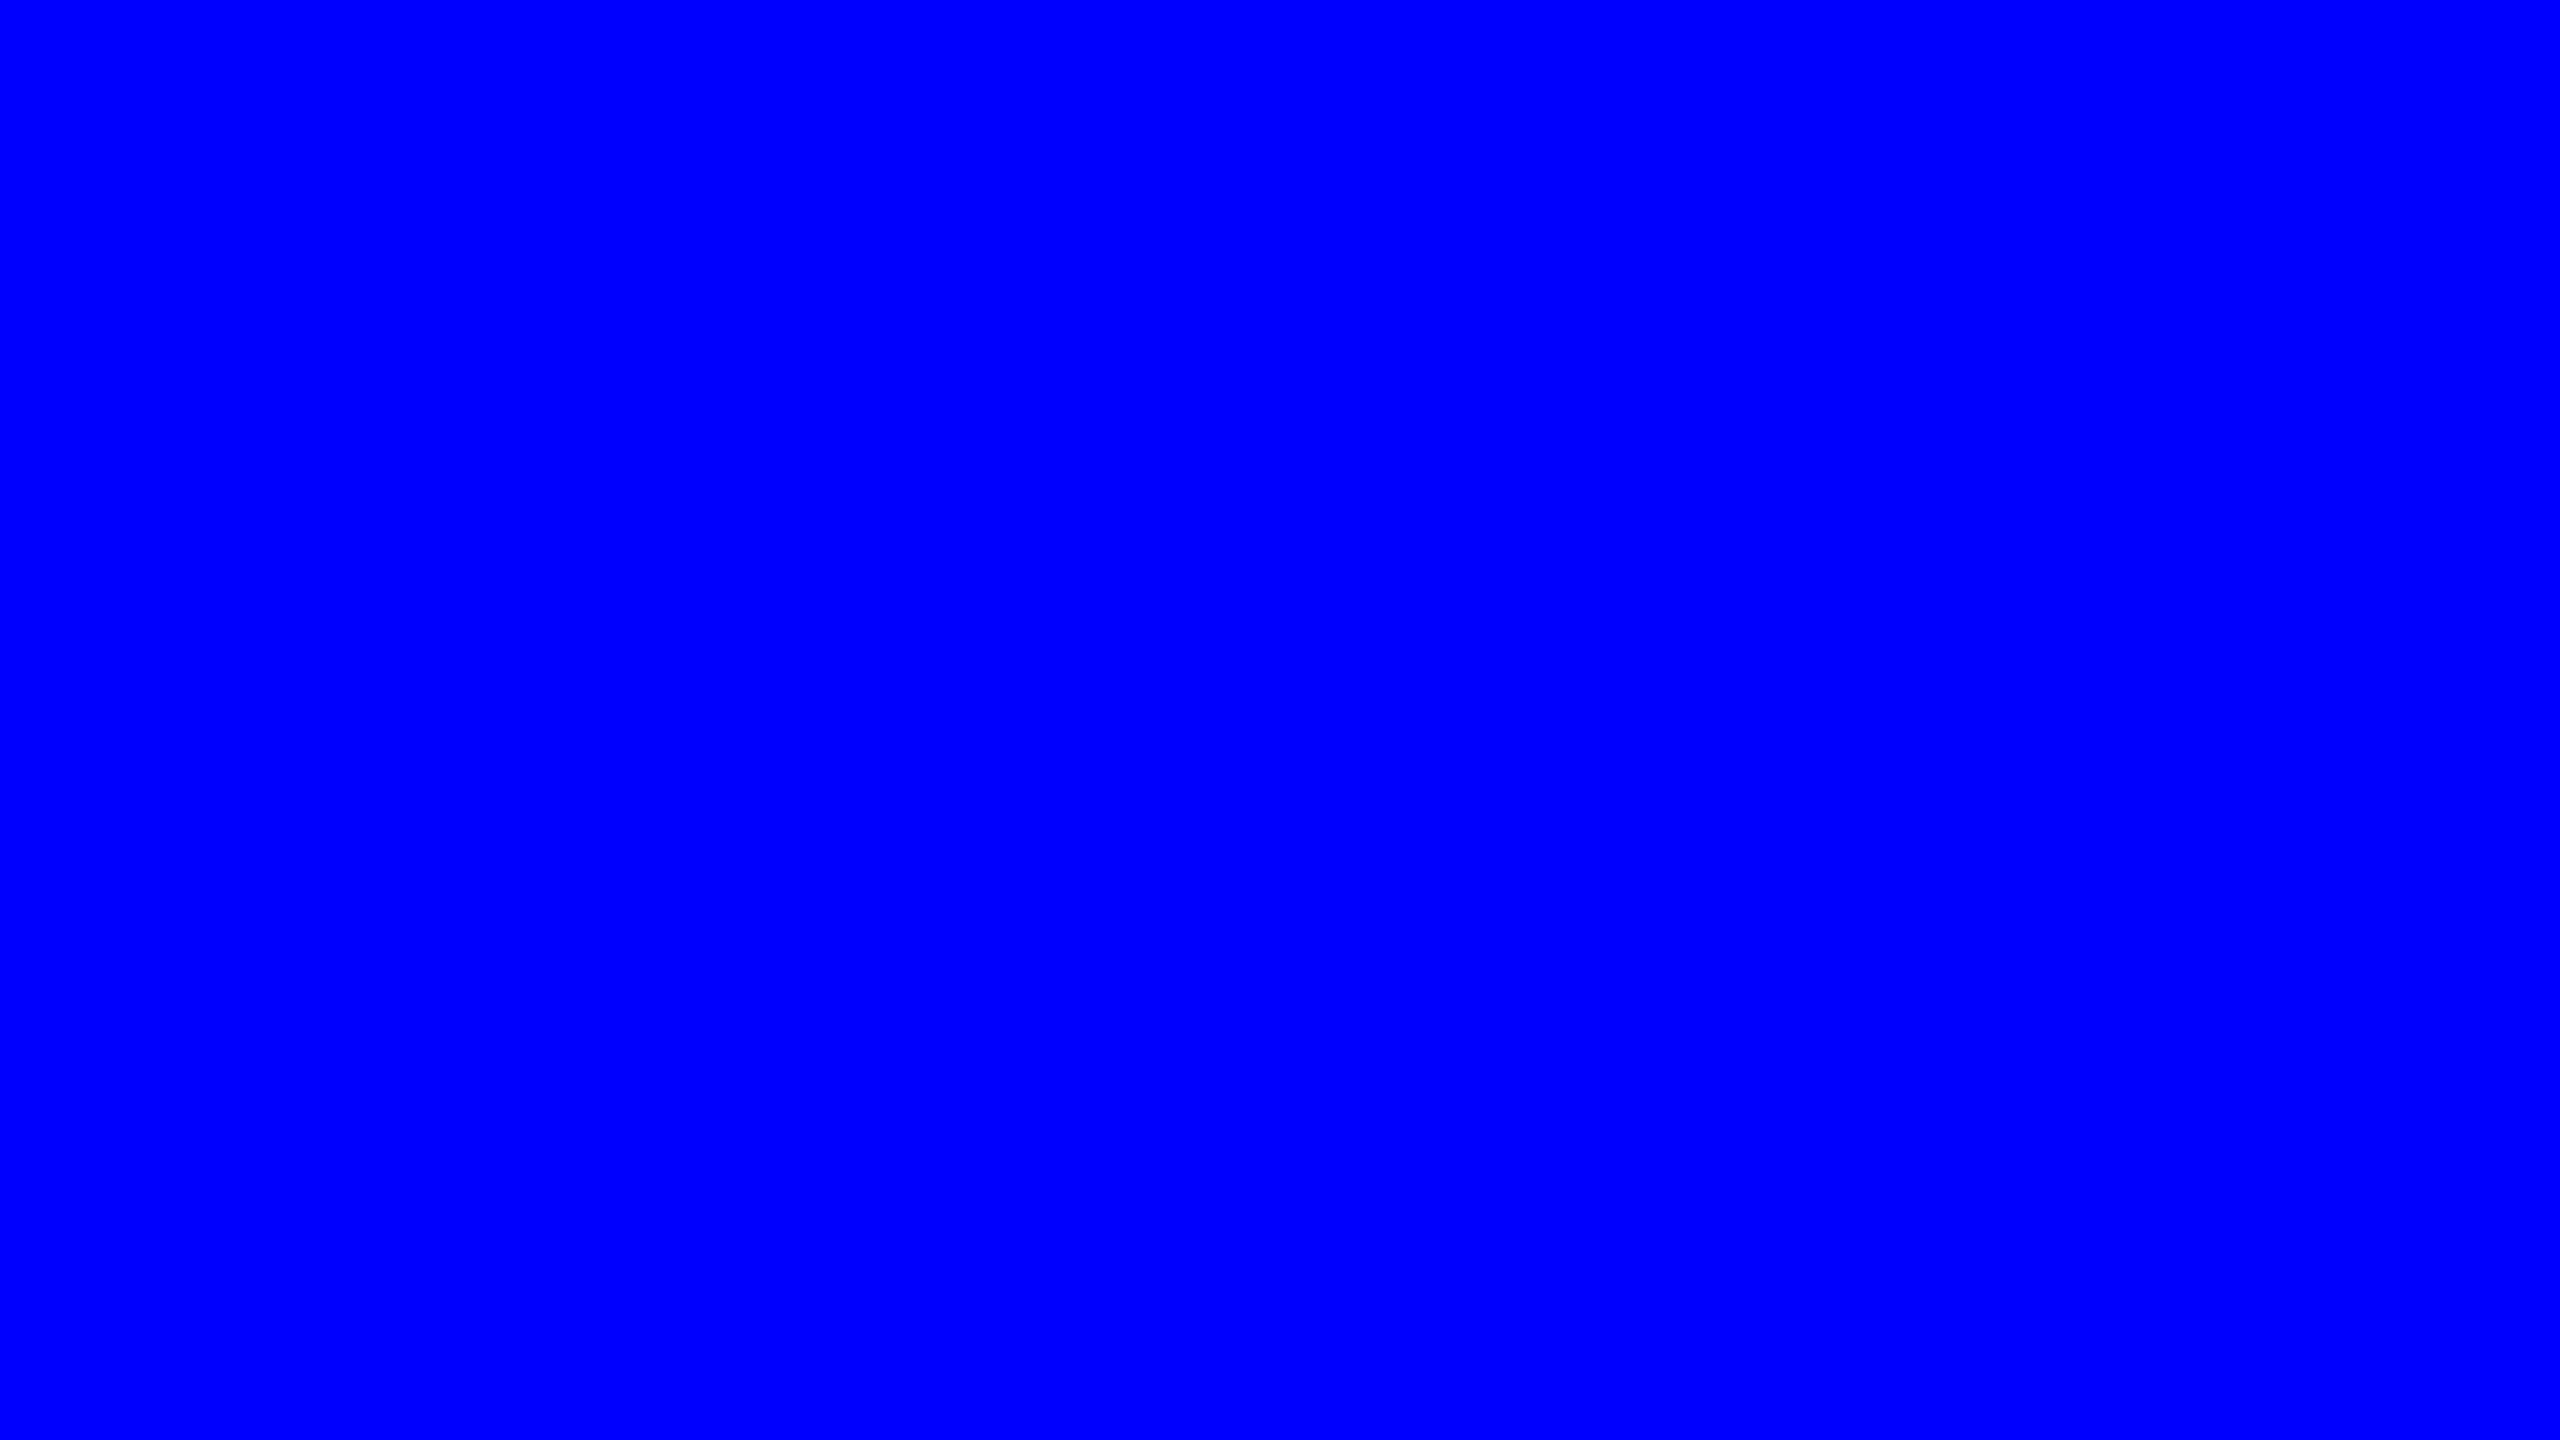 2560x1440 Blue Solid Color Background